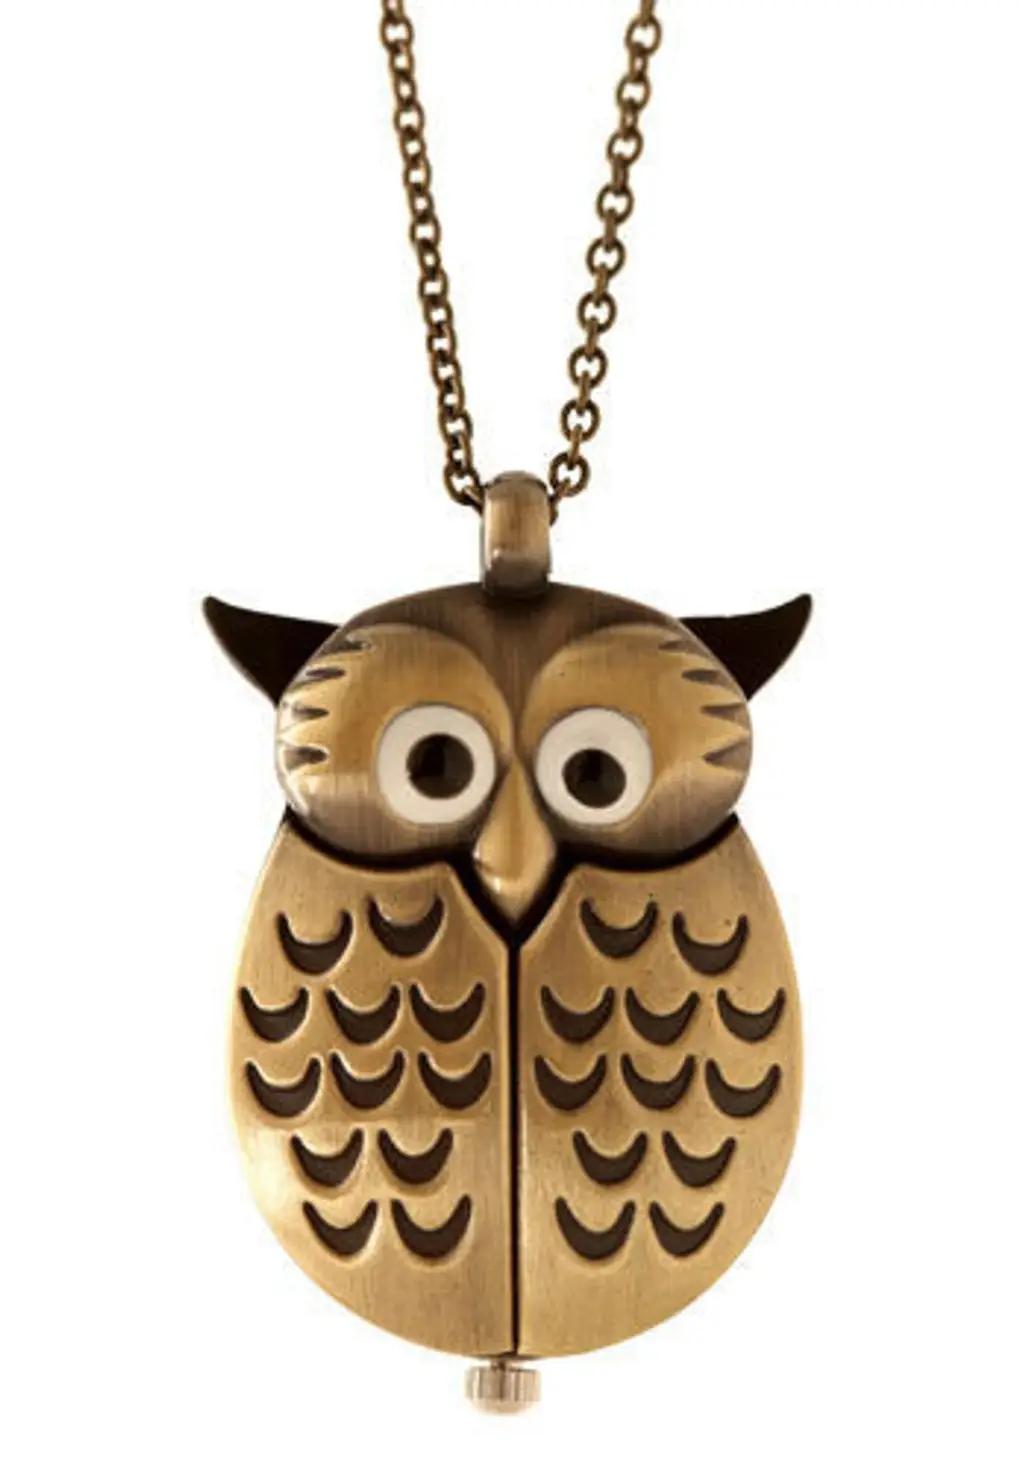 How Soon is Owl Necklace